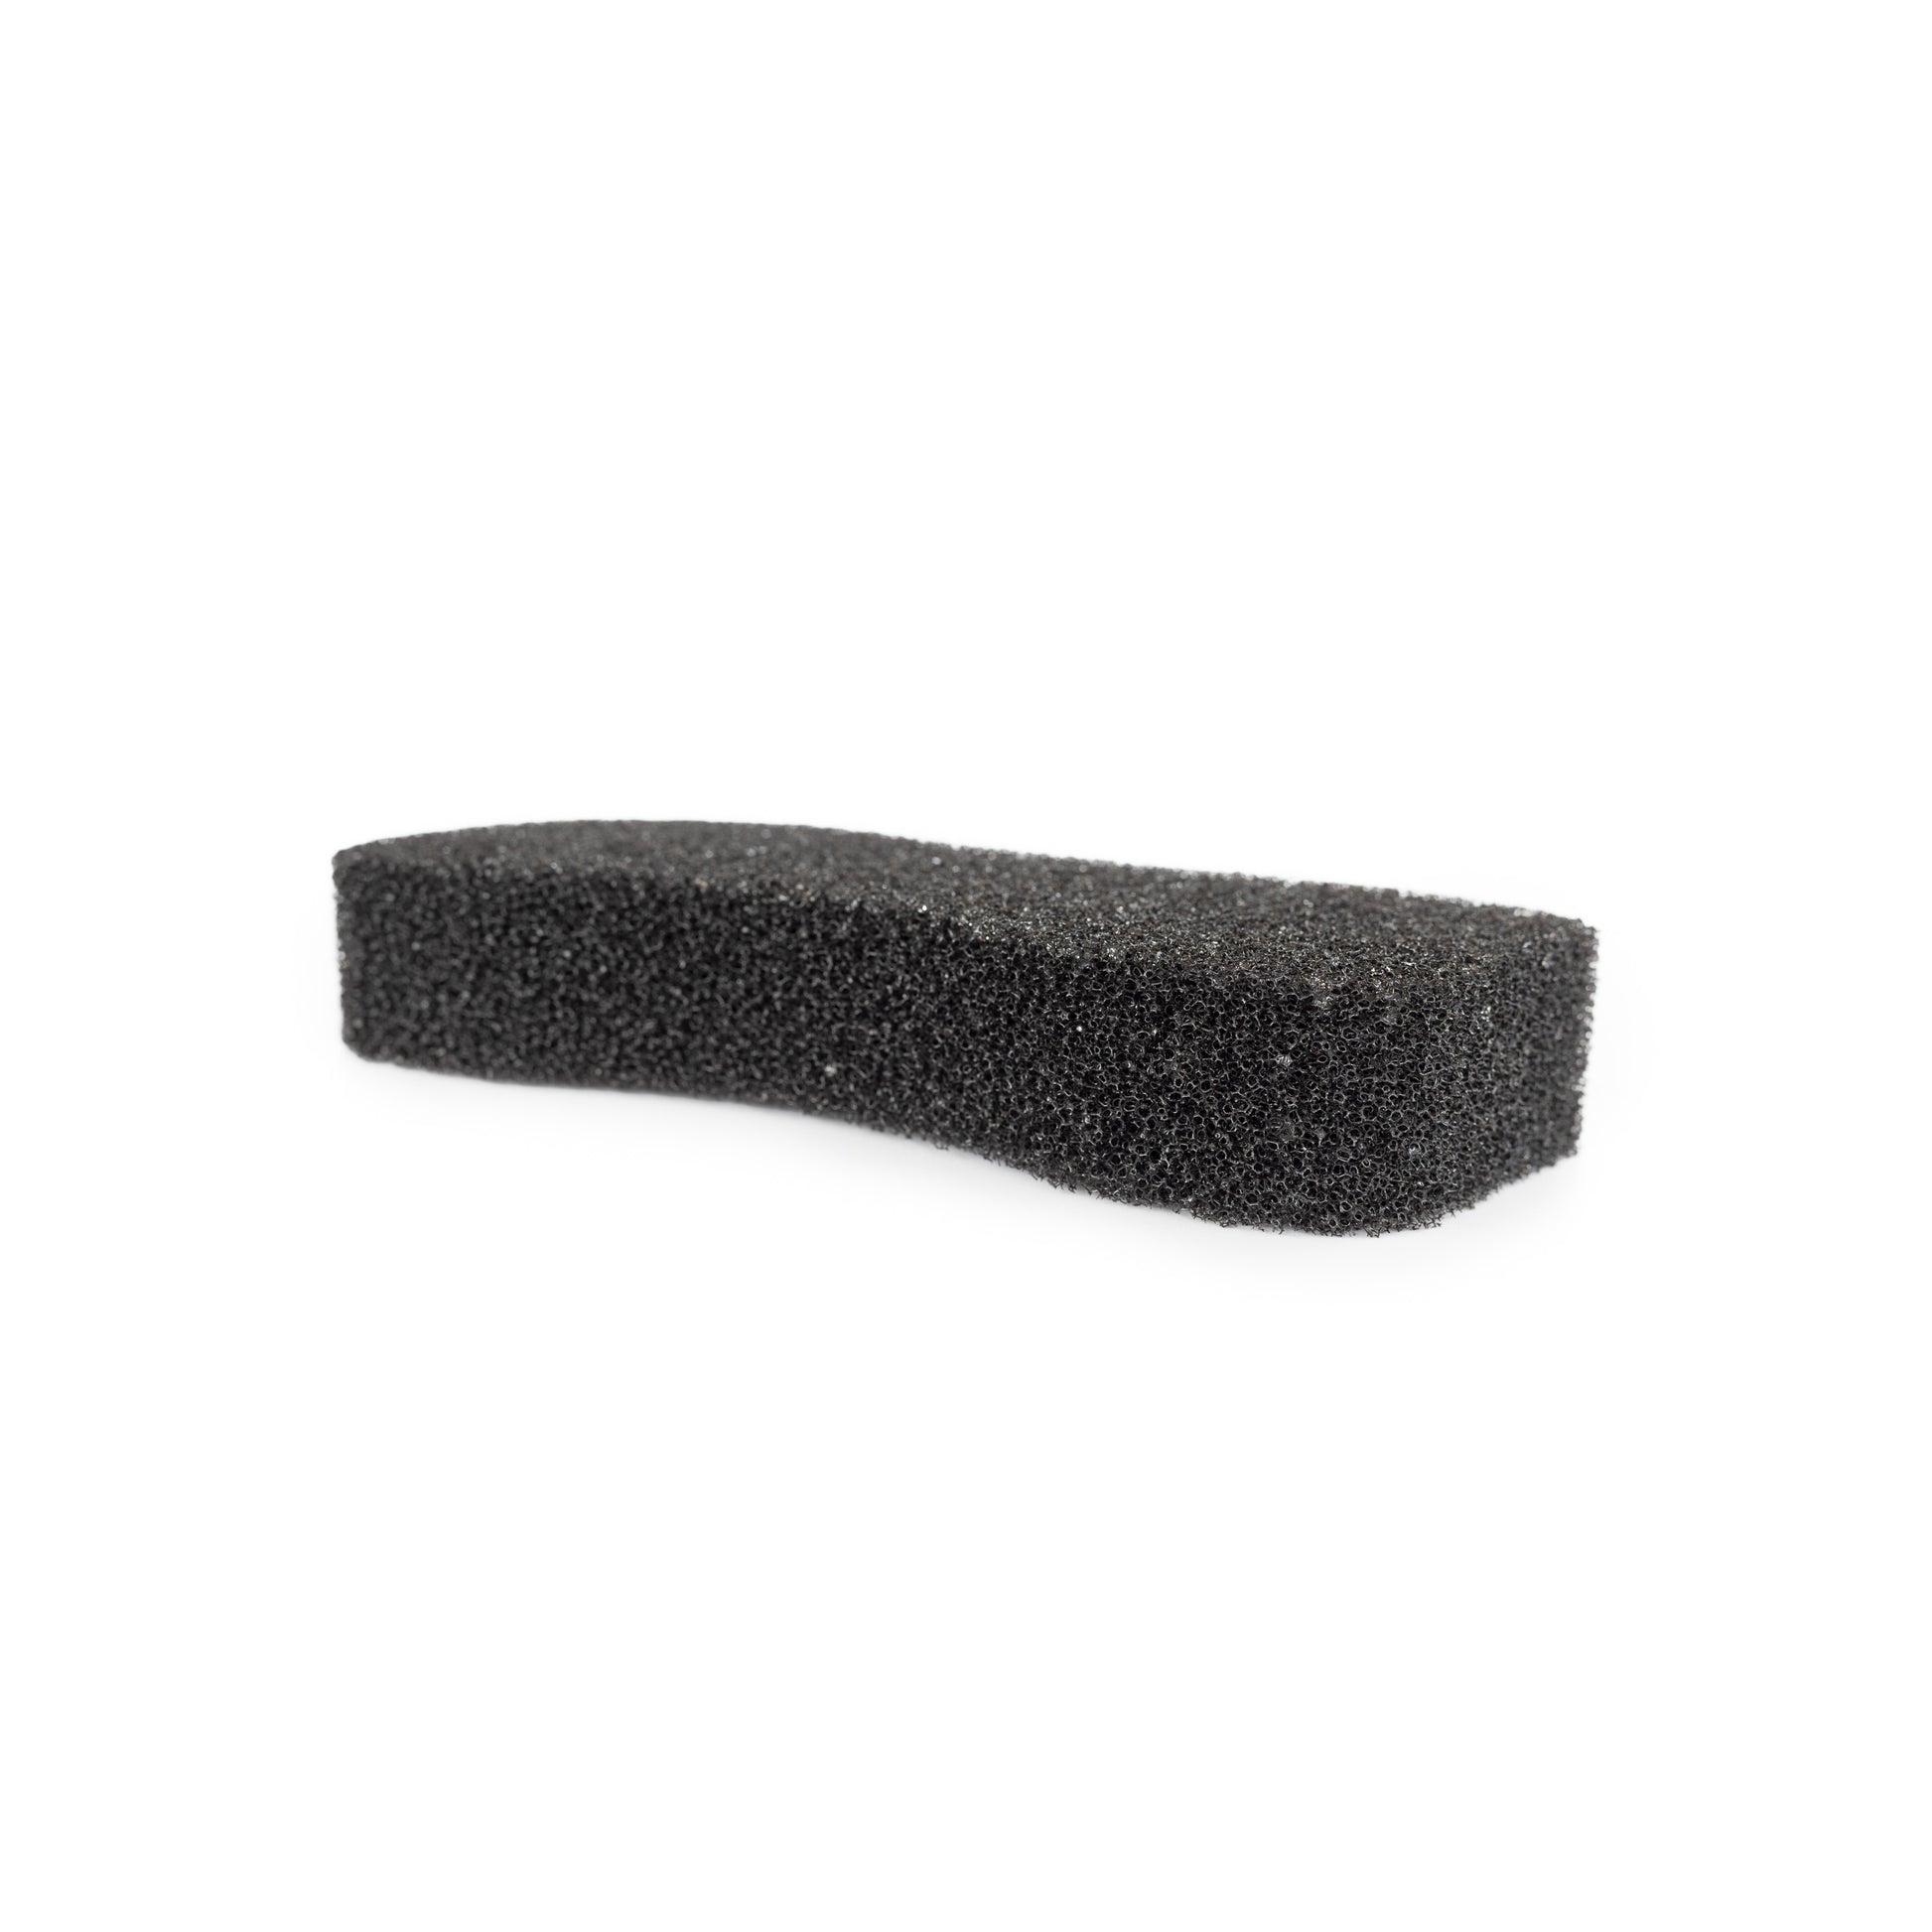 A photo of the Hairy Pony Compressed Scrubbing Horse Sponge after expanding with water. A black, coarse sponge on a white background.